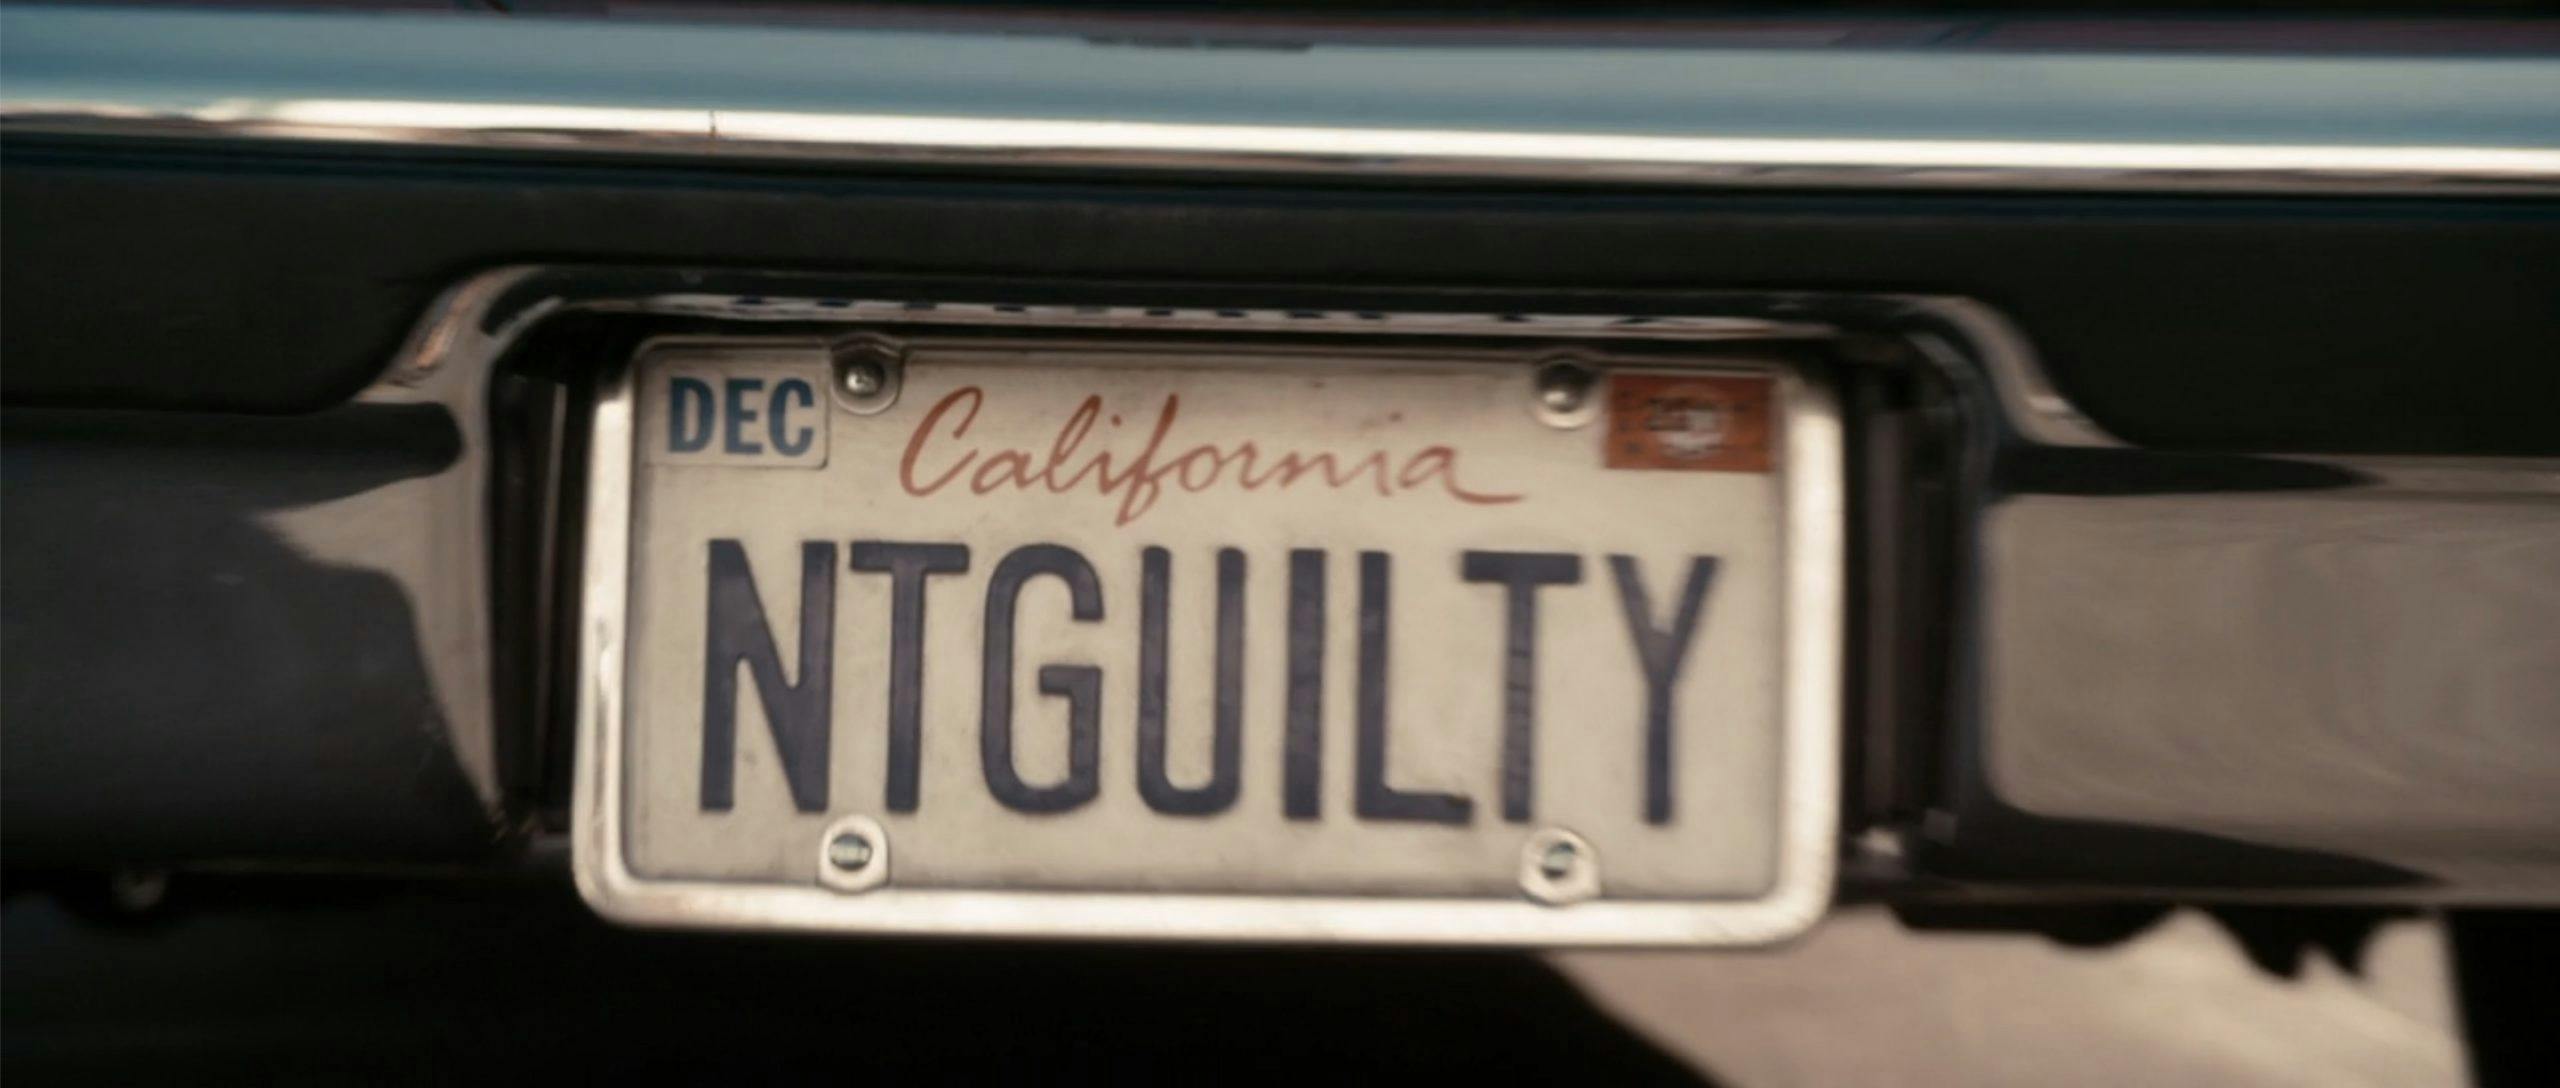 Lincoln Lawyer 2011 film not guilty vanity plate